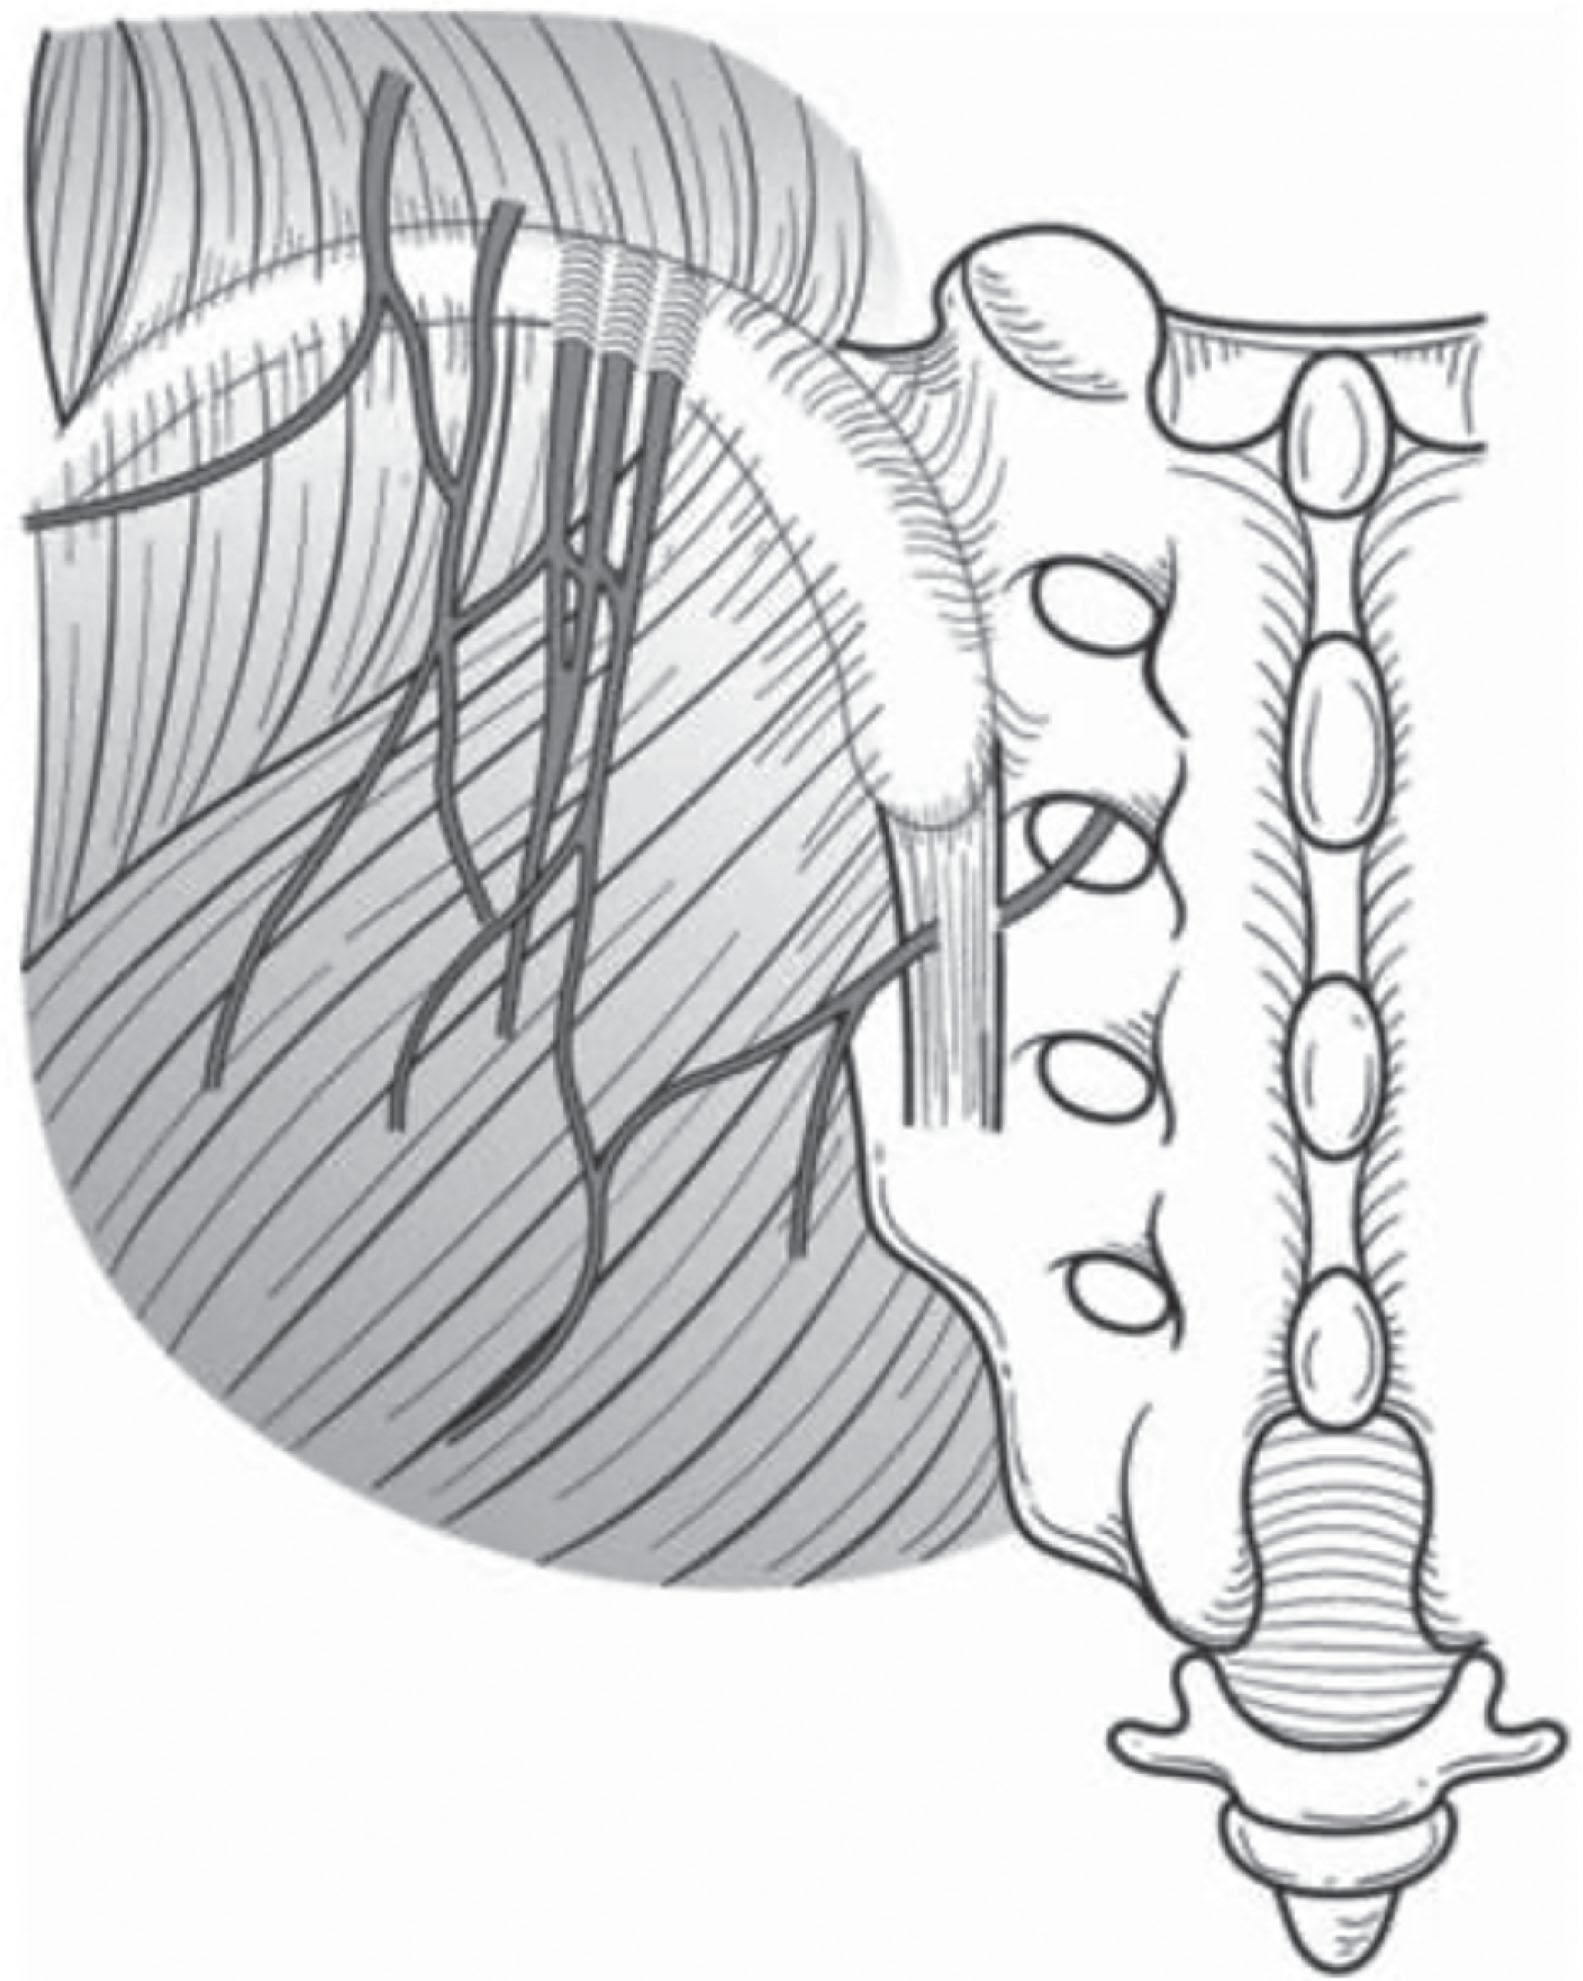 Figure 19.1, Anatomy of the superior cluneal nerves.